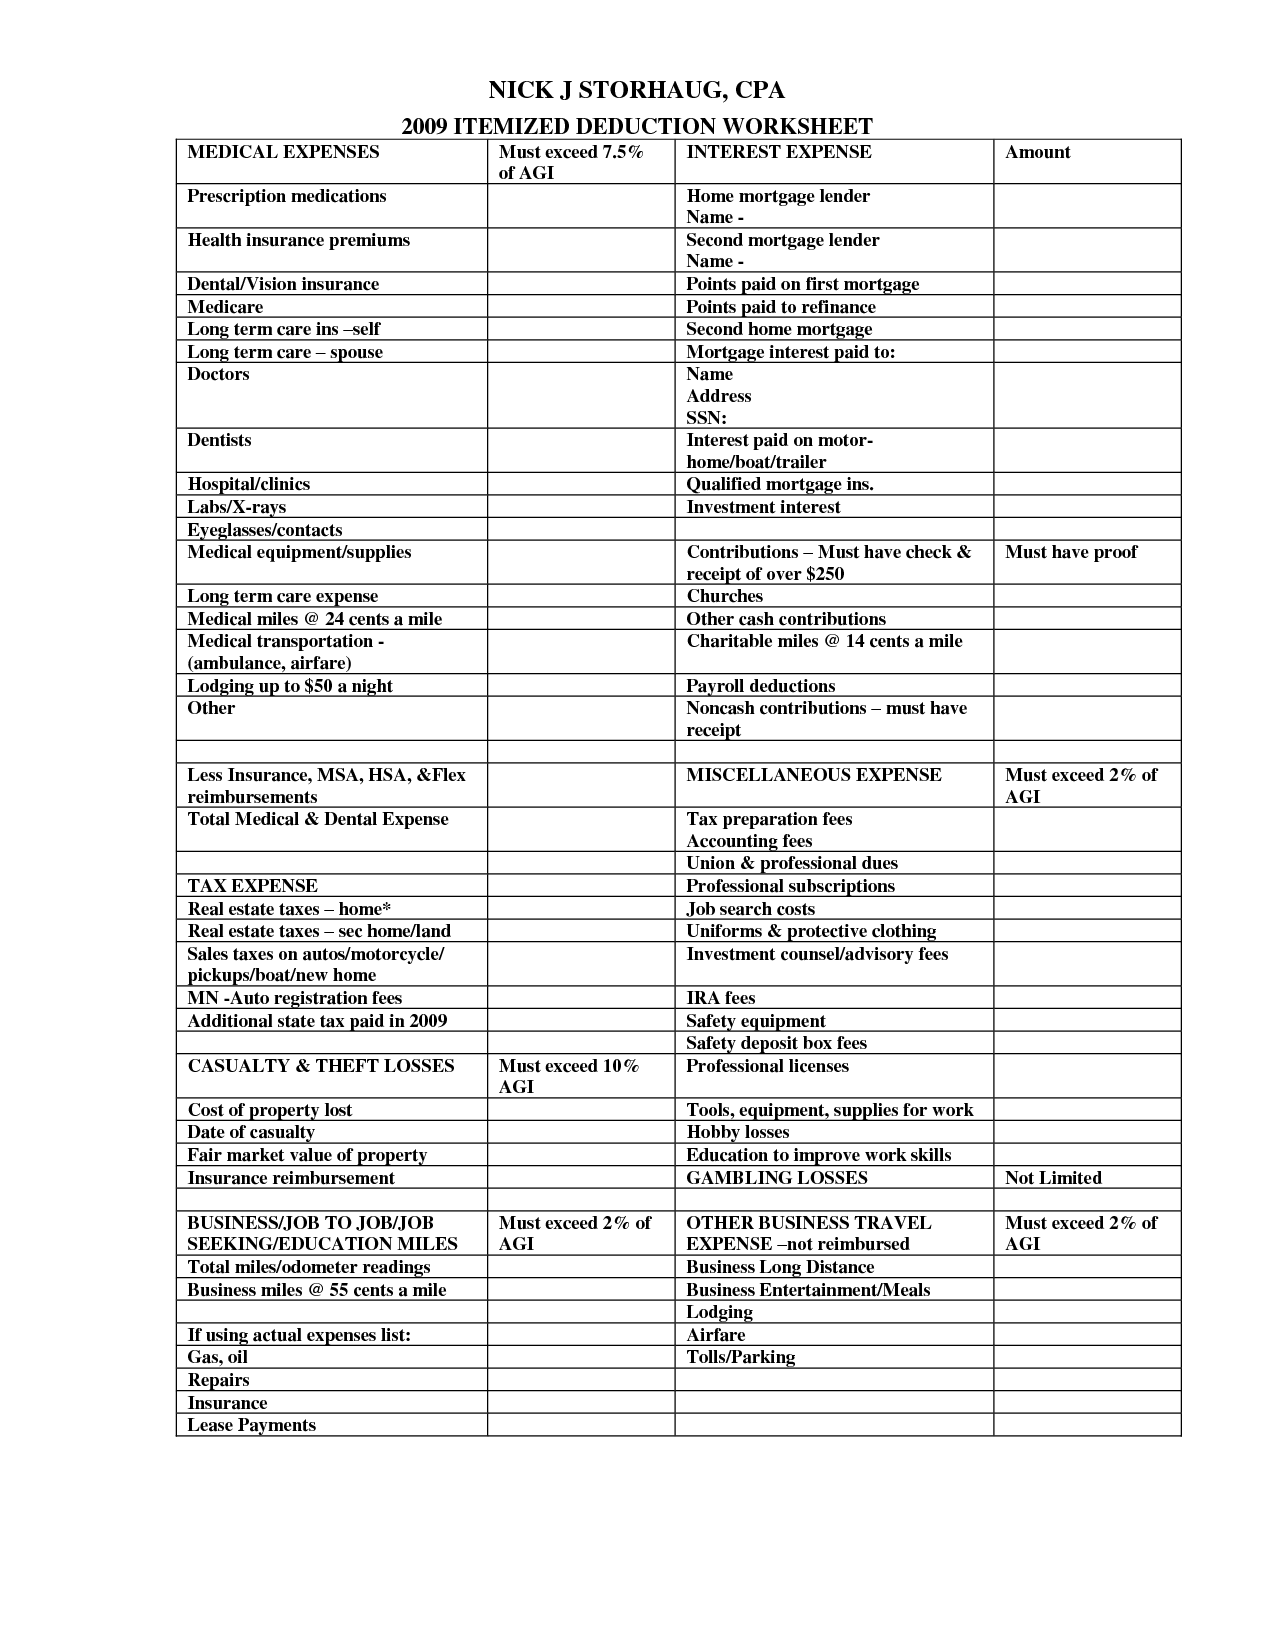 12 Best Images of Tax Deduction Worksheet 2014 - Tax Itemized Deduction